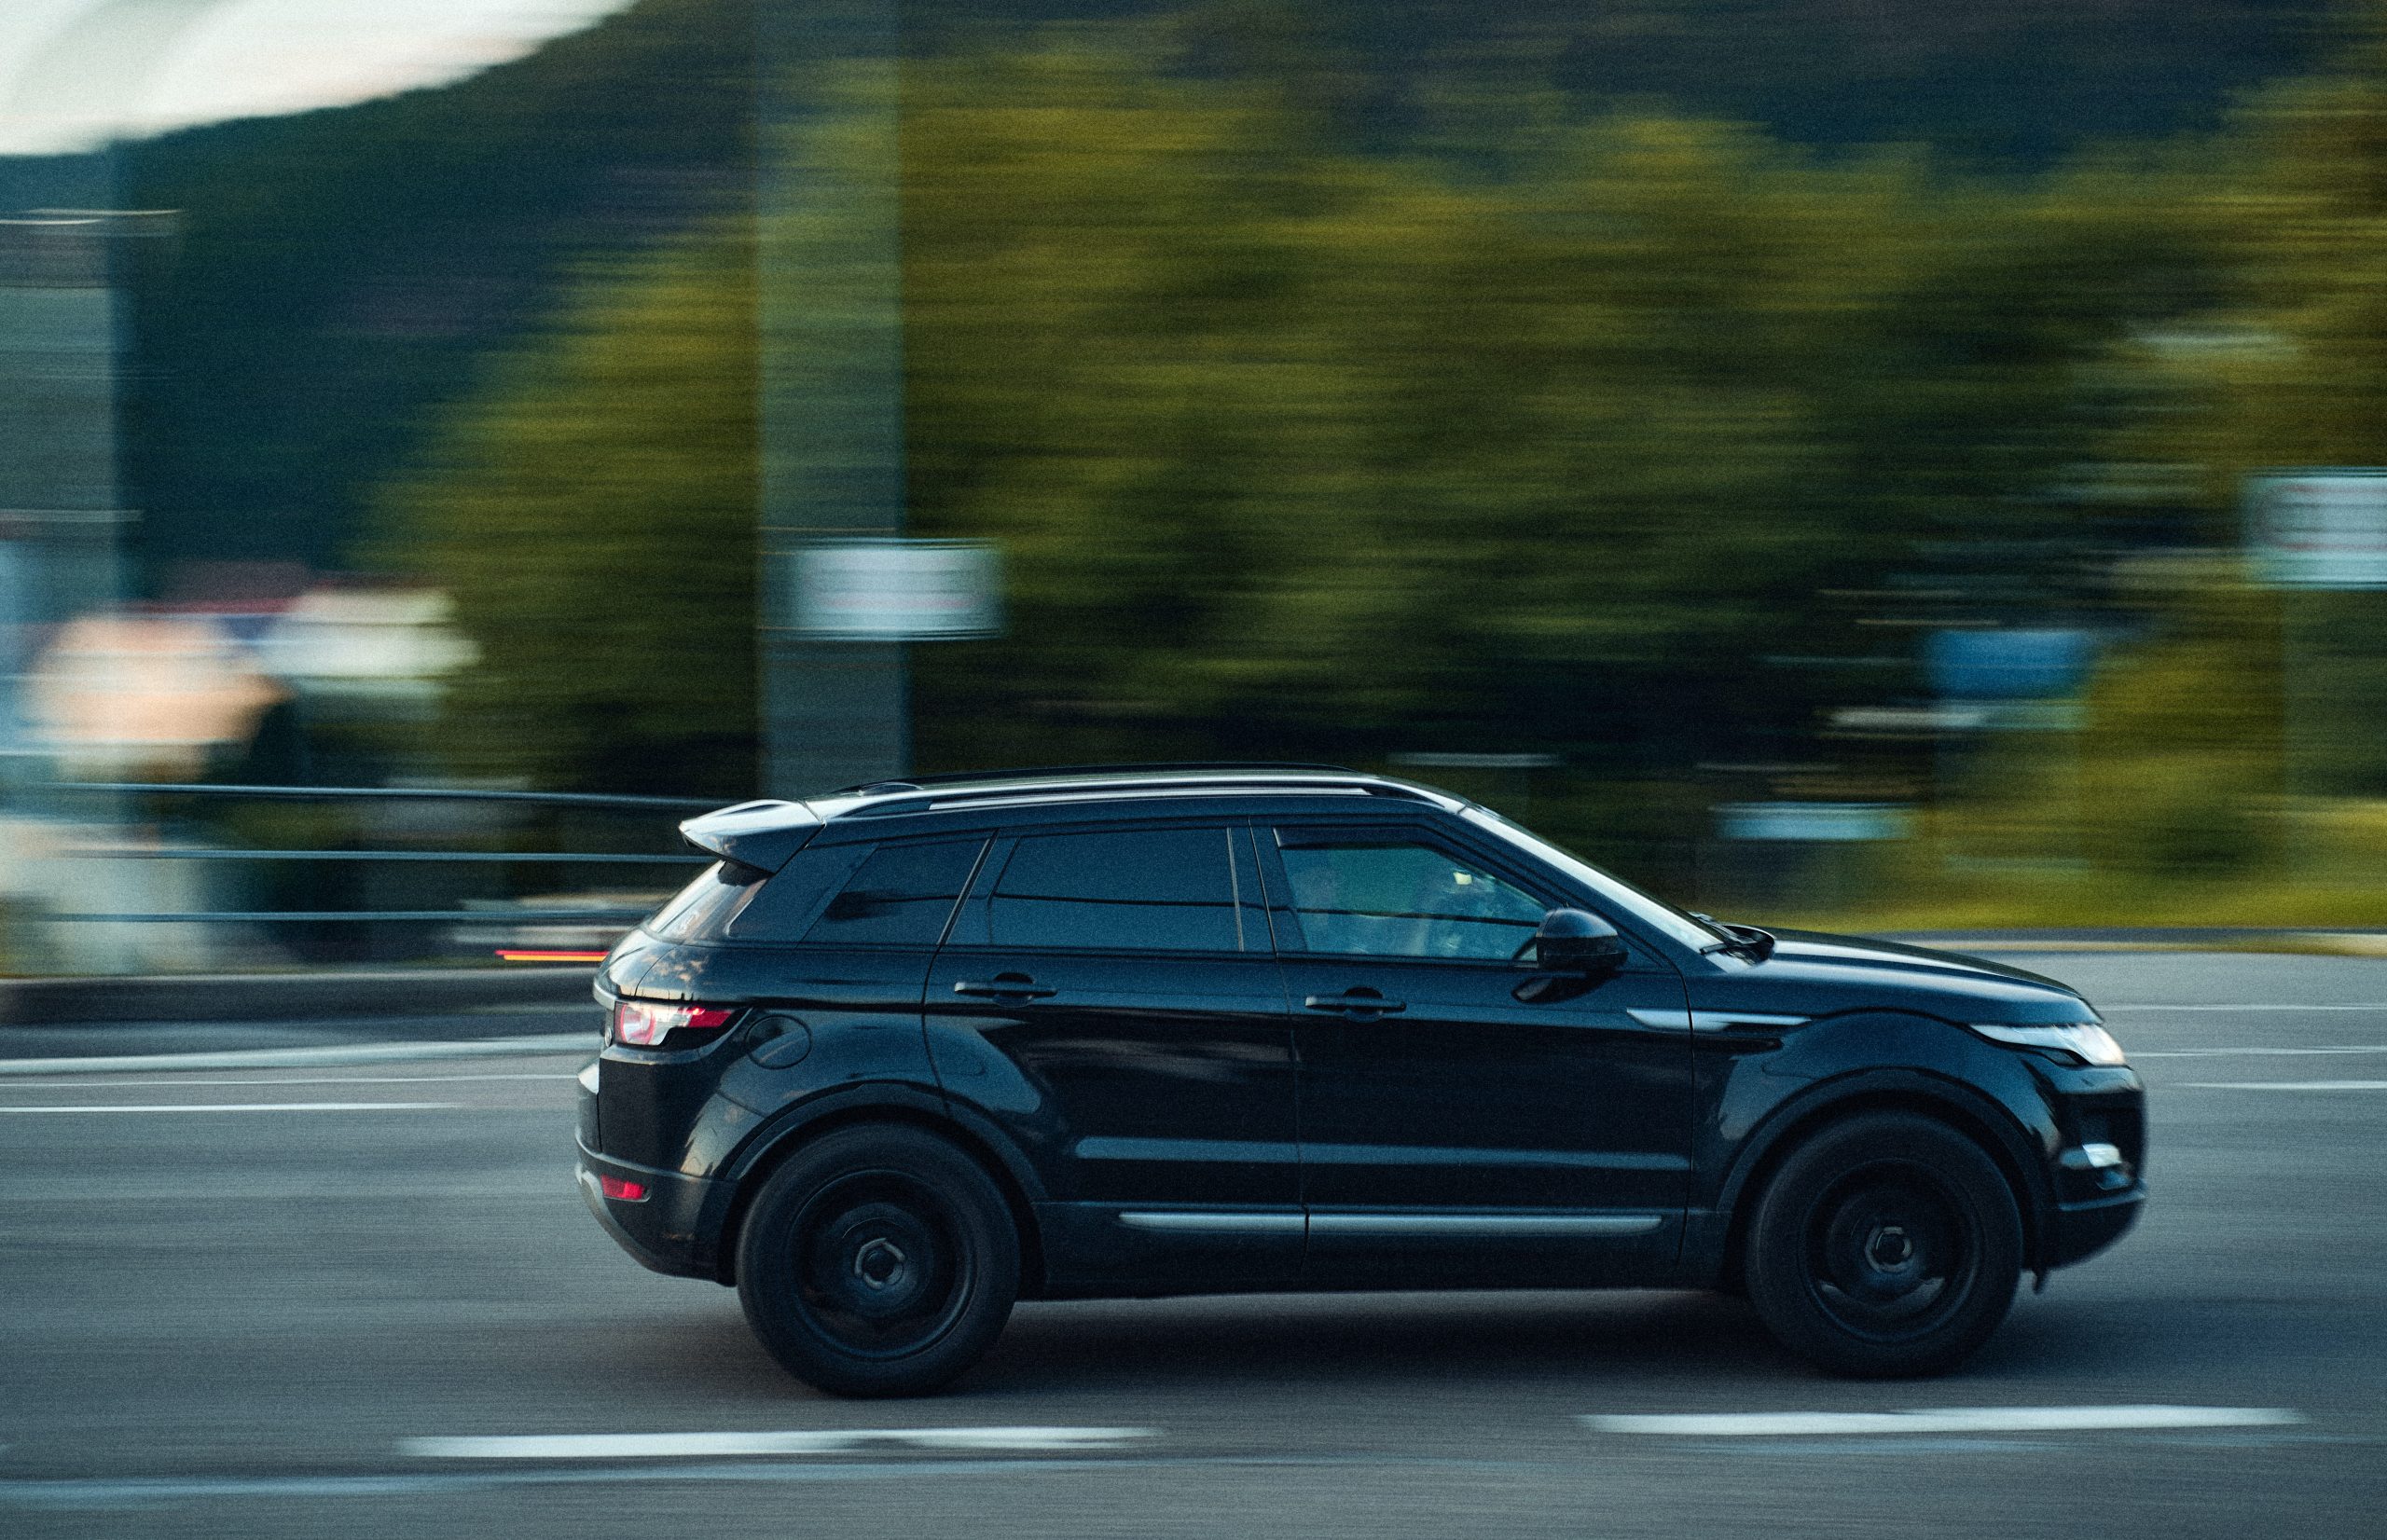 Rnage Rover Evoque Driving